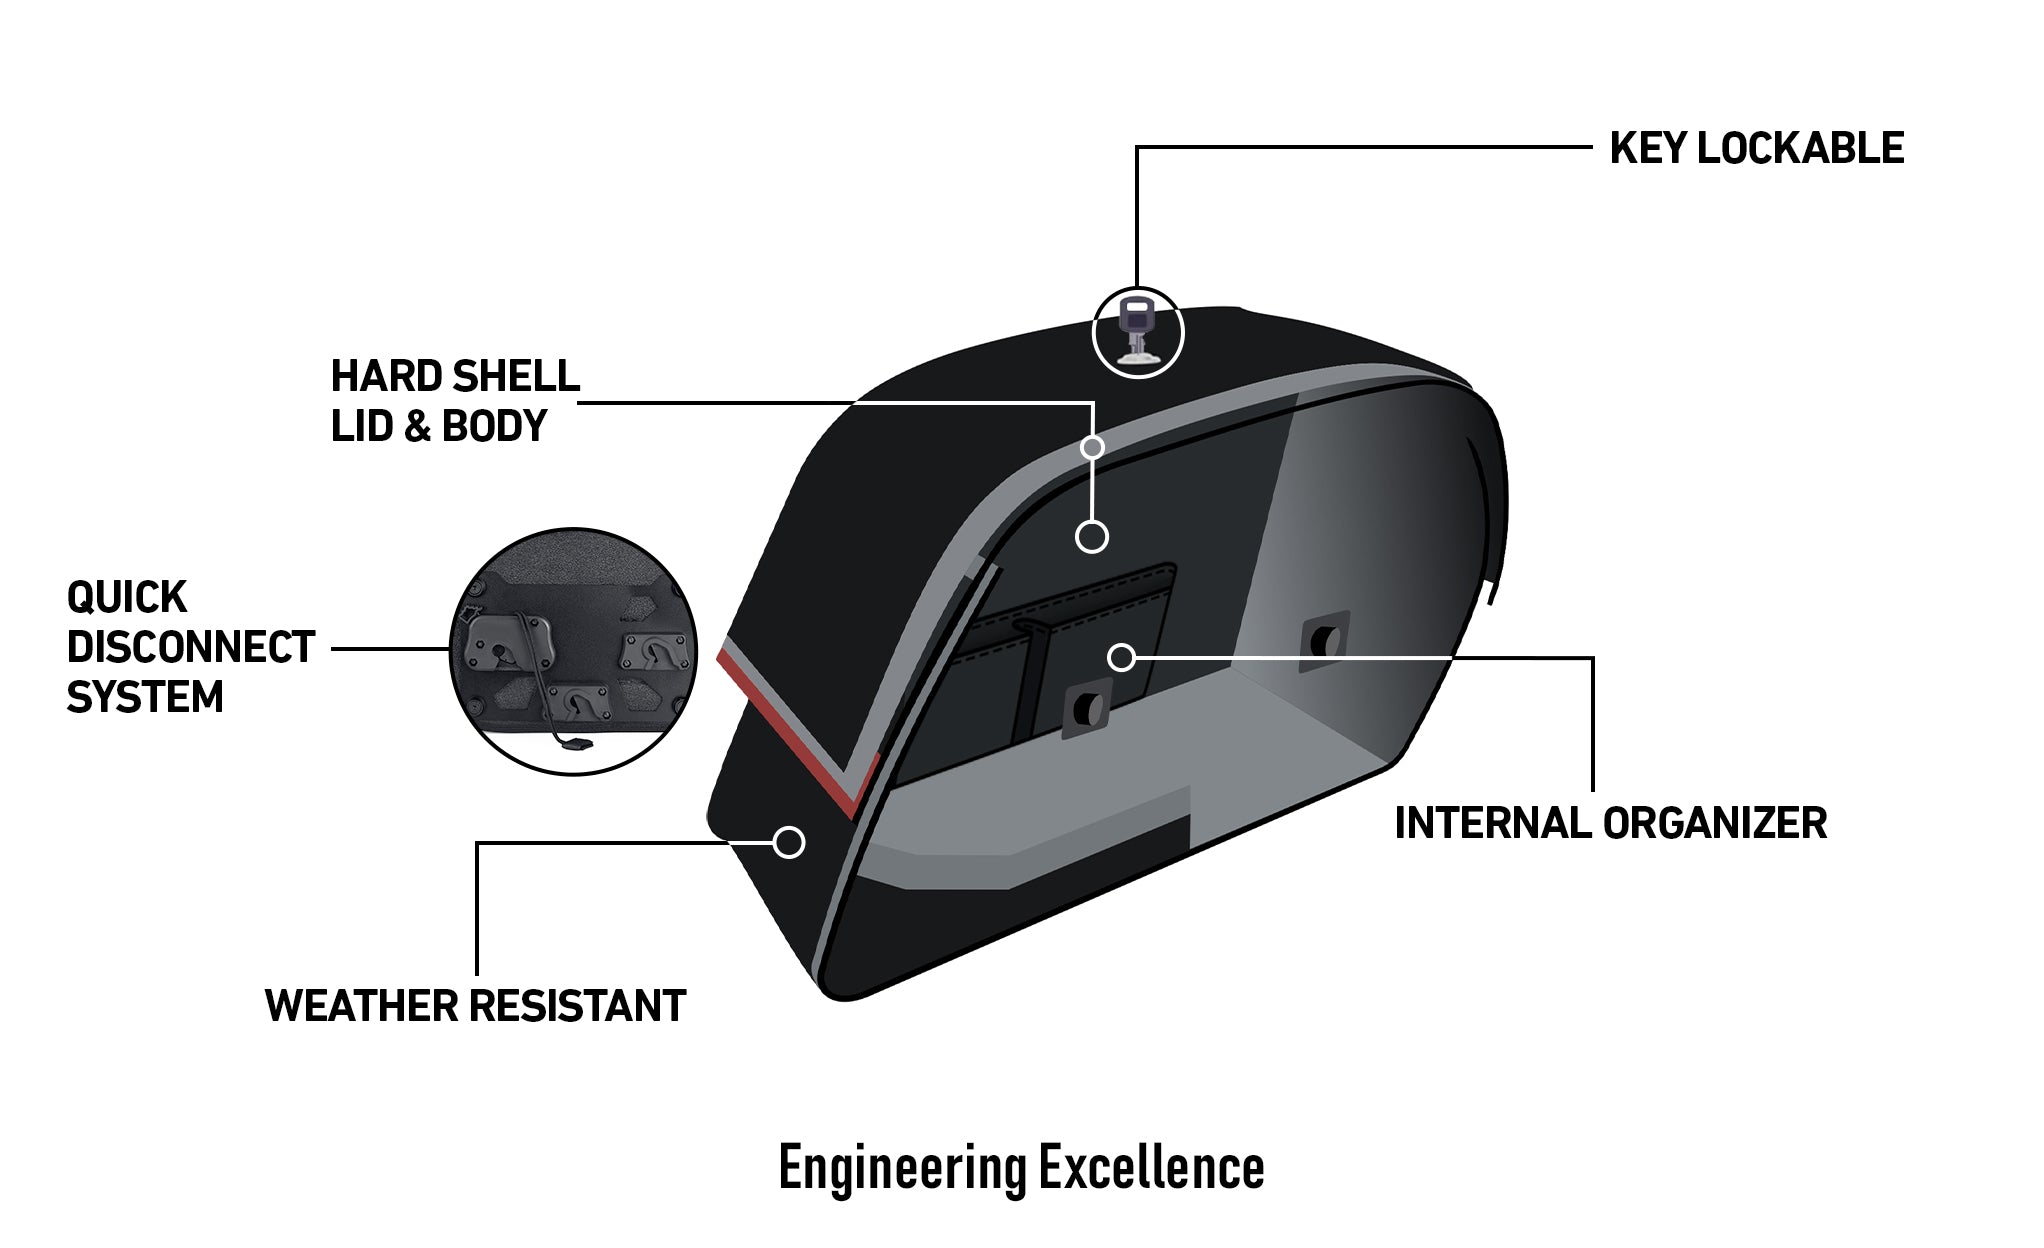 22L - Warrior Medium Quick-Mount Motorcycle Saddlebags For Harley Dyna Super Glide FXD Engineering Excellence @expand